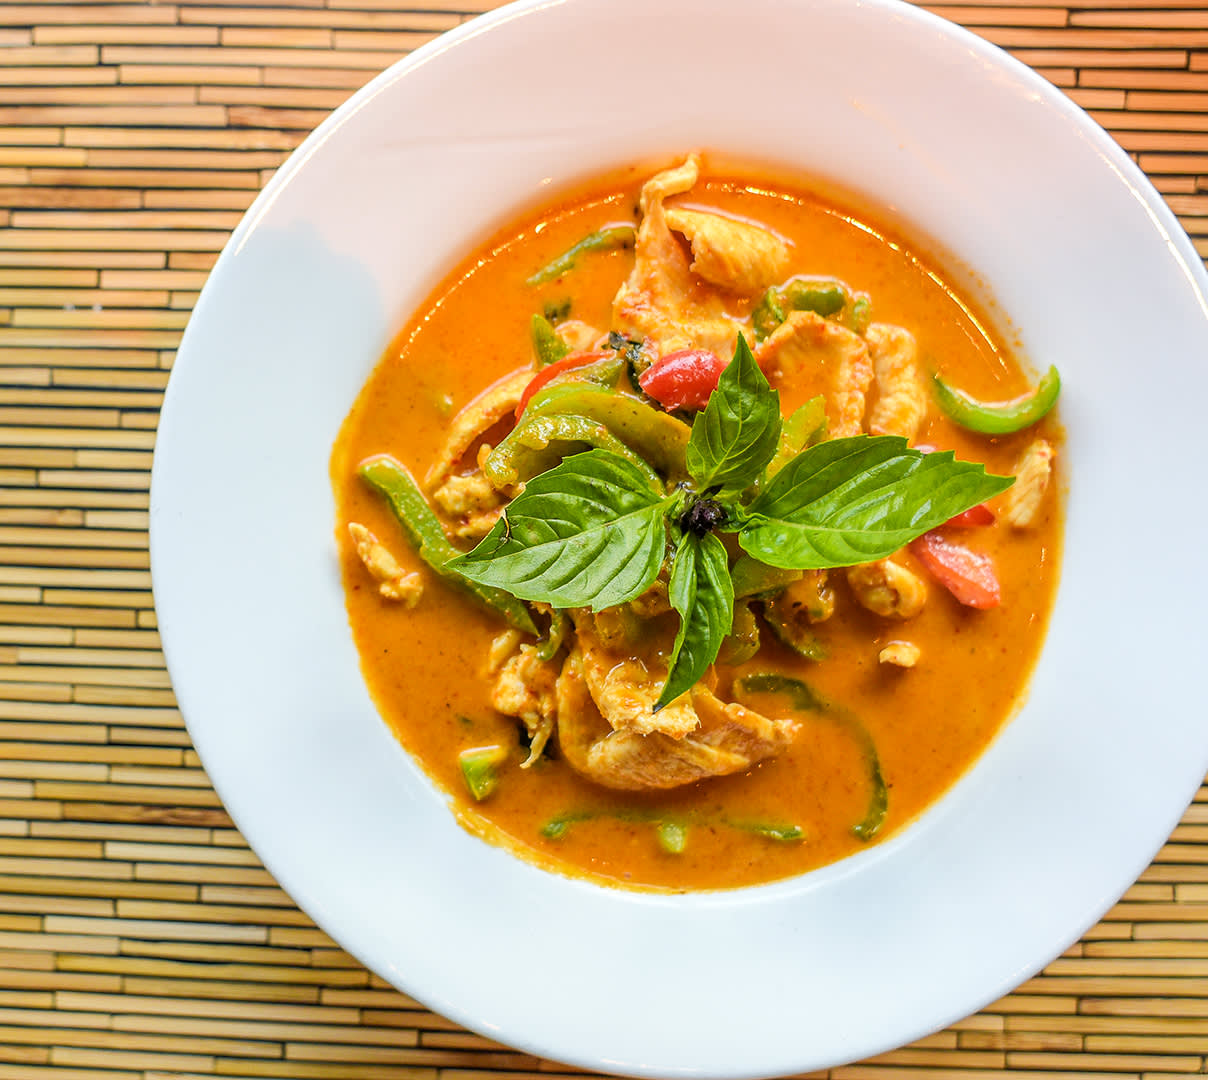 BestThaiSeattle BaiTong panangcurry feature